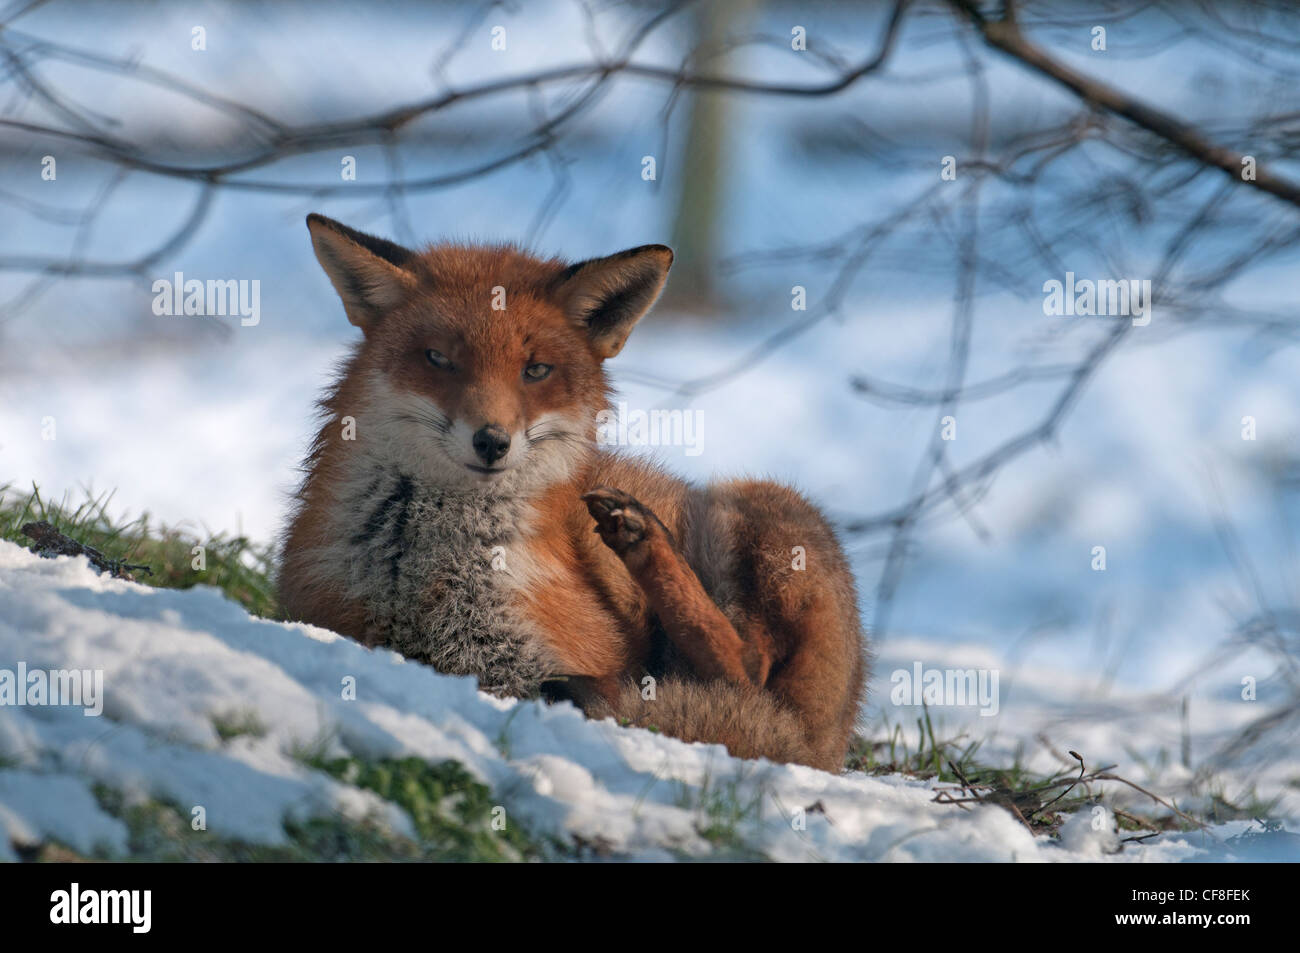 RED FOX Vulpes vulpes IN SNOW. Stock Photo